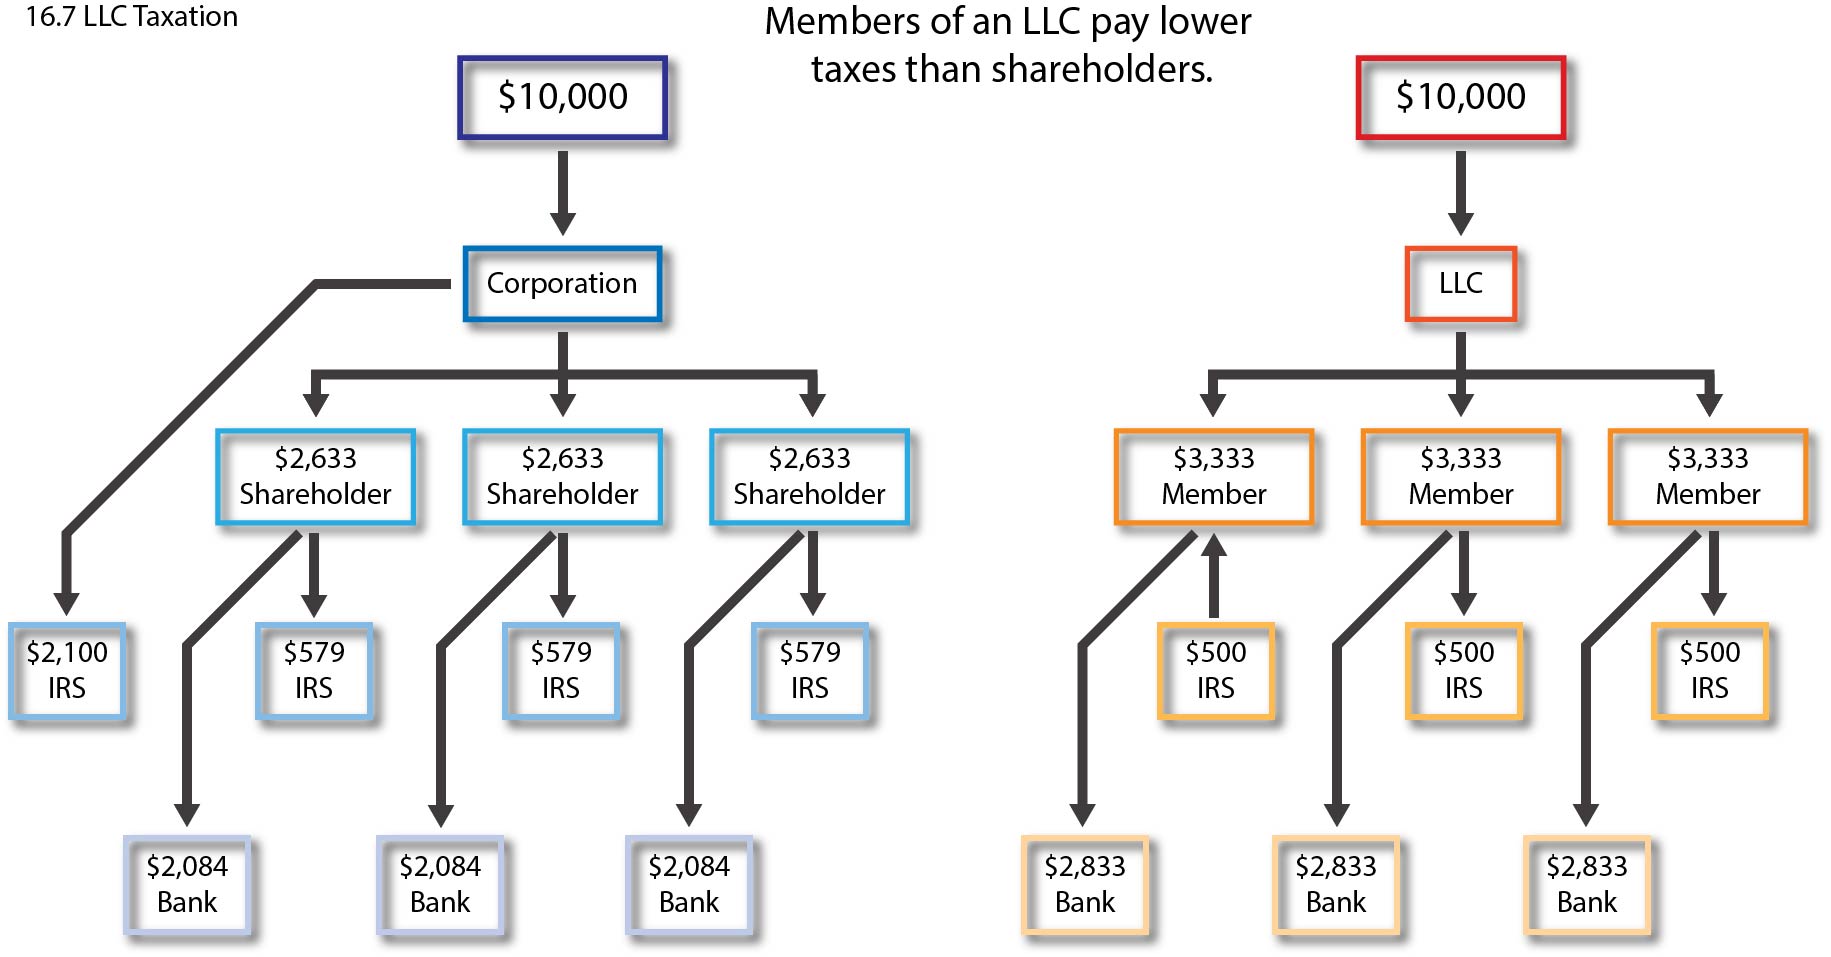 Graphic showing members of an LLC pay lower taxes than corporate shareholders